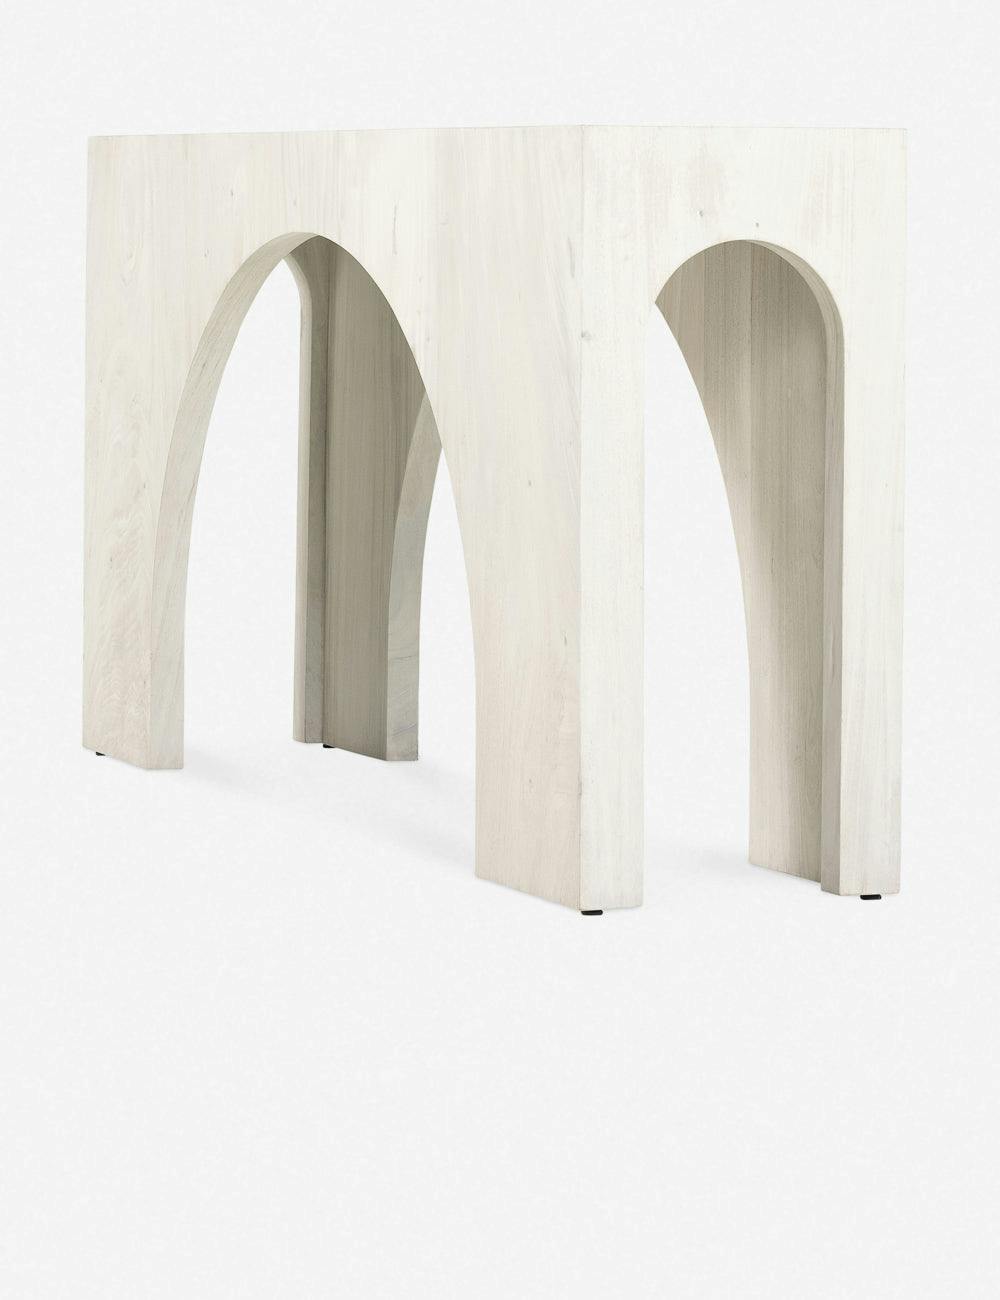 Xian Console Table - Natural